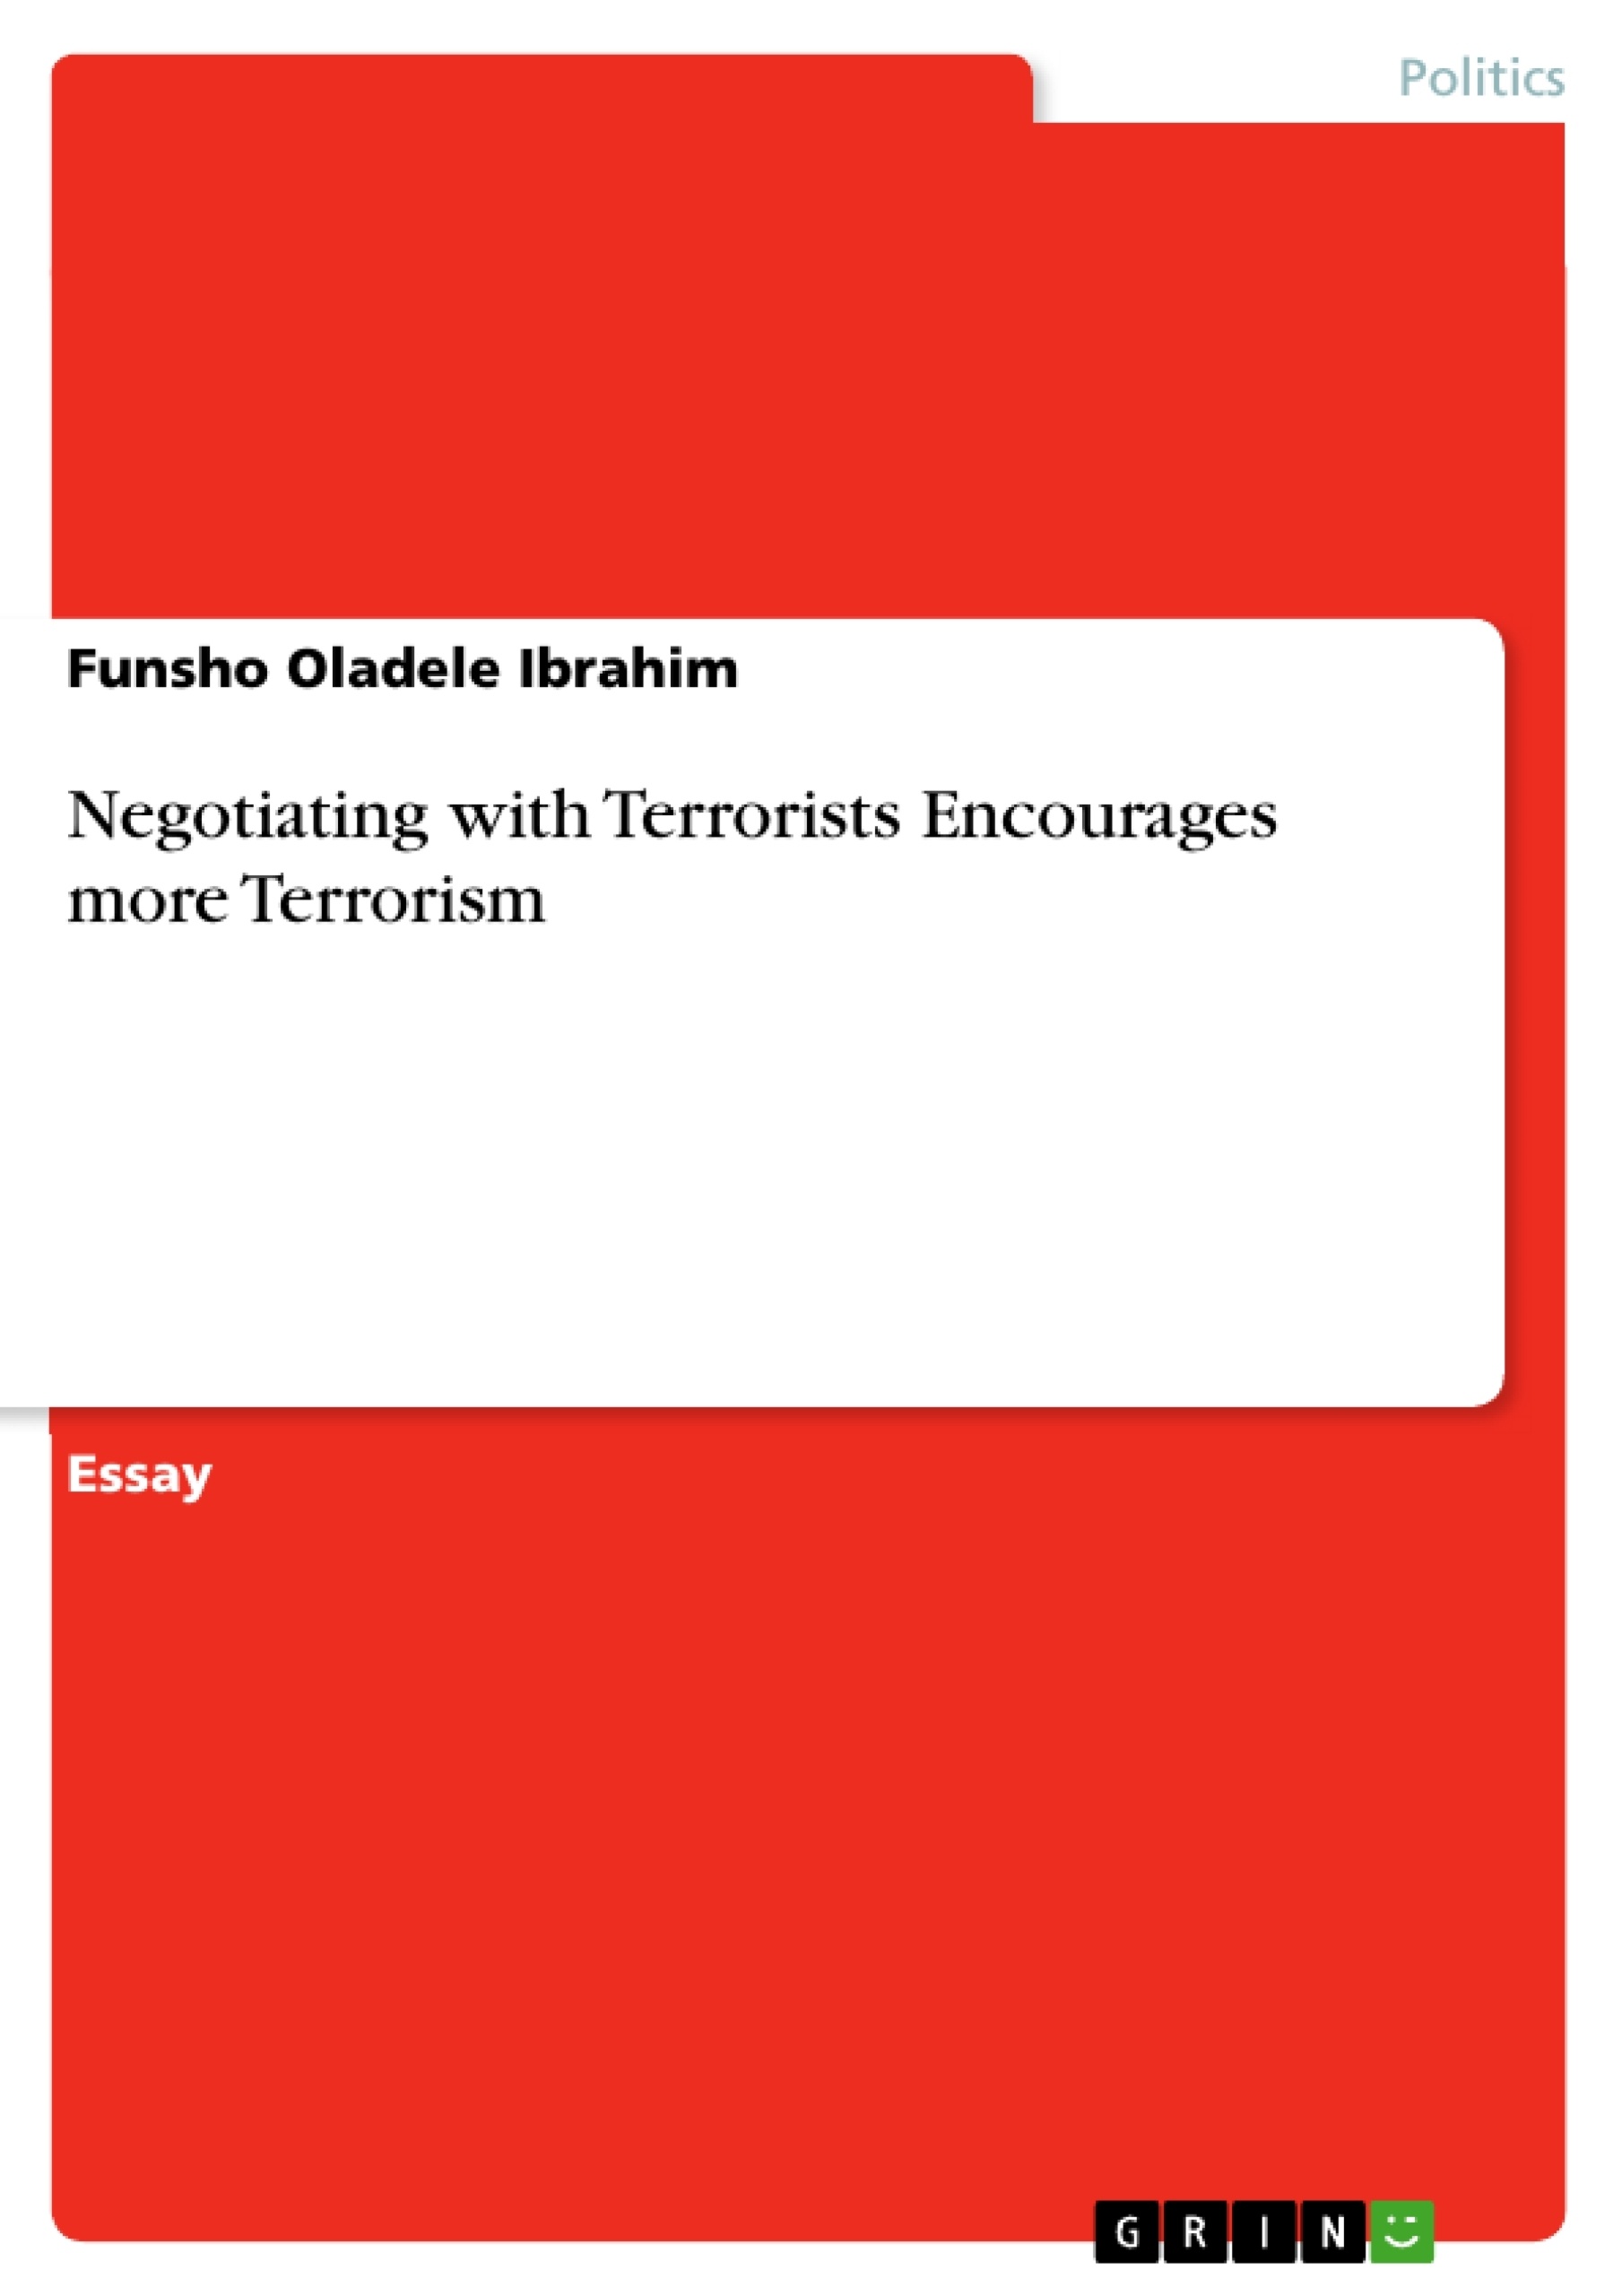 Title: Negotiating with Terrorists Encourages more Terrorism